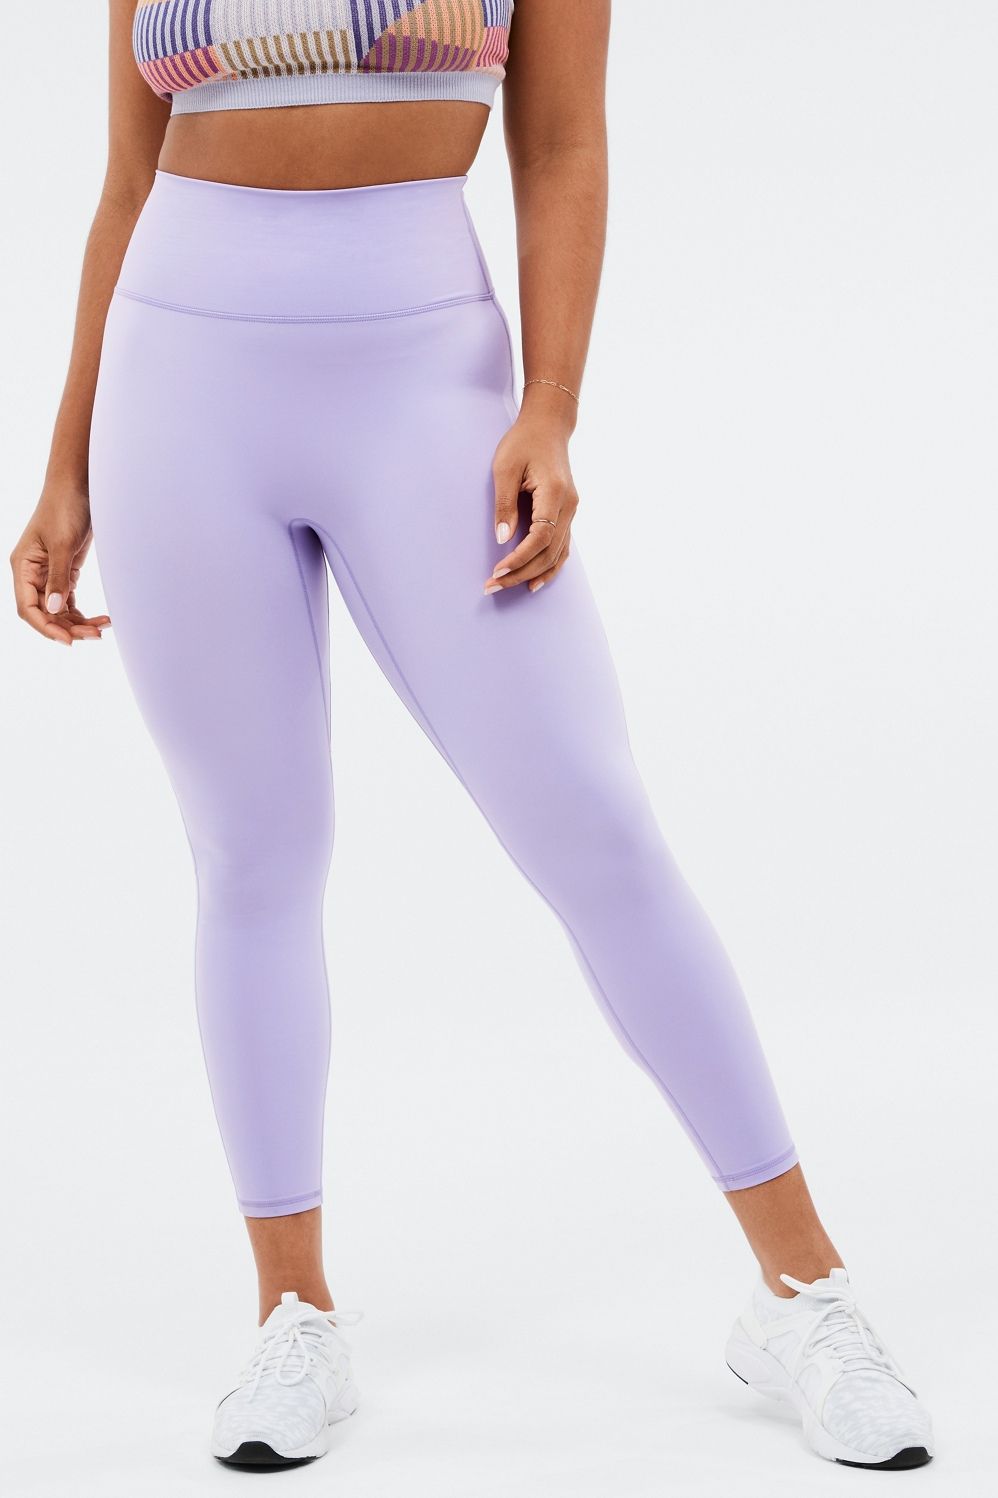 Anywhere Ultra High-Waisted 7/8 | Fabletics